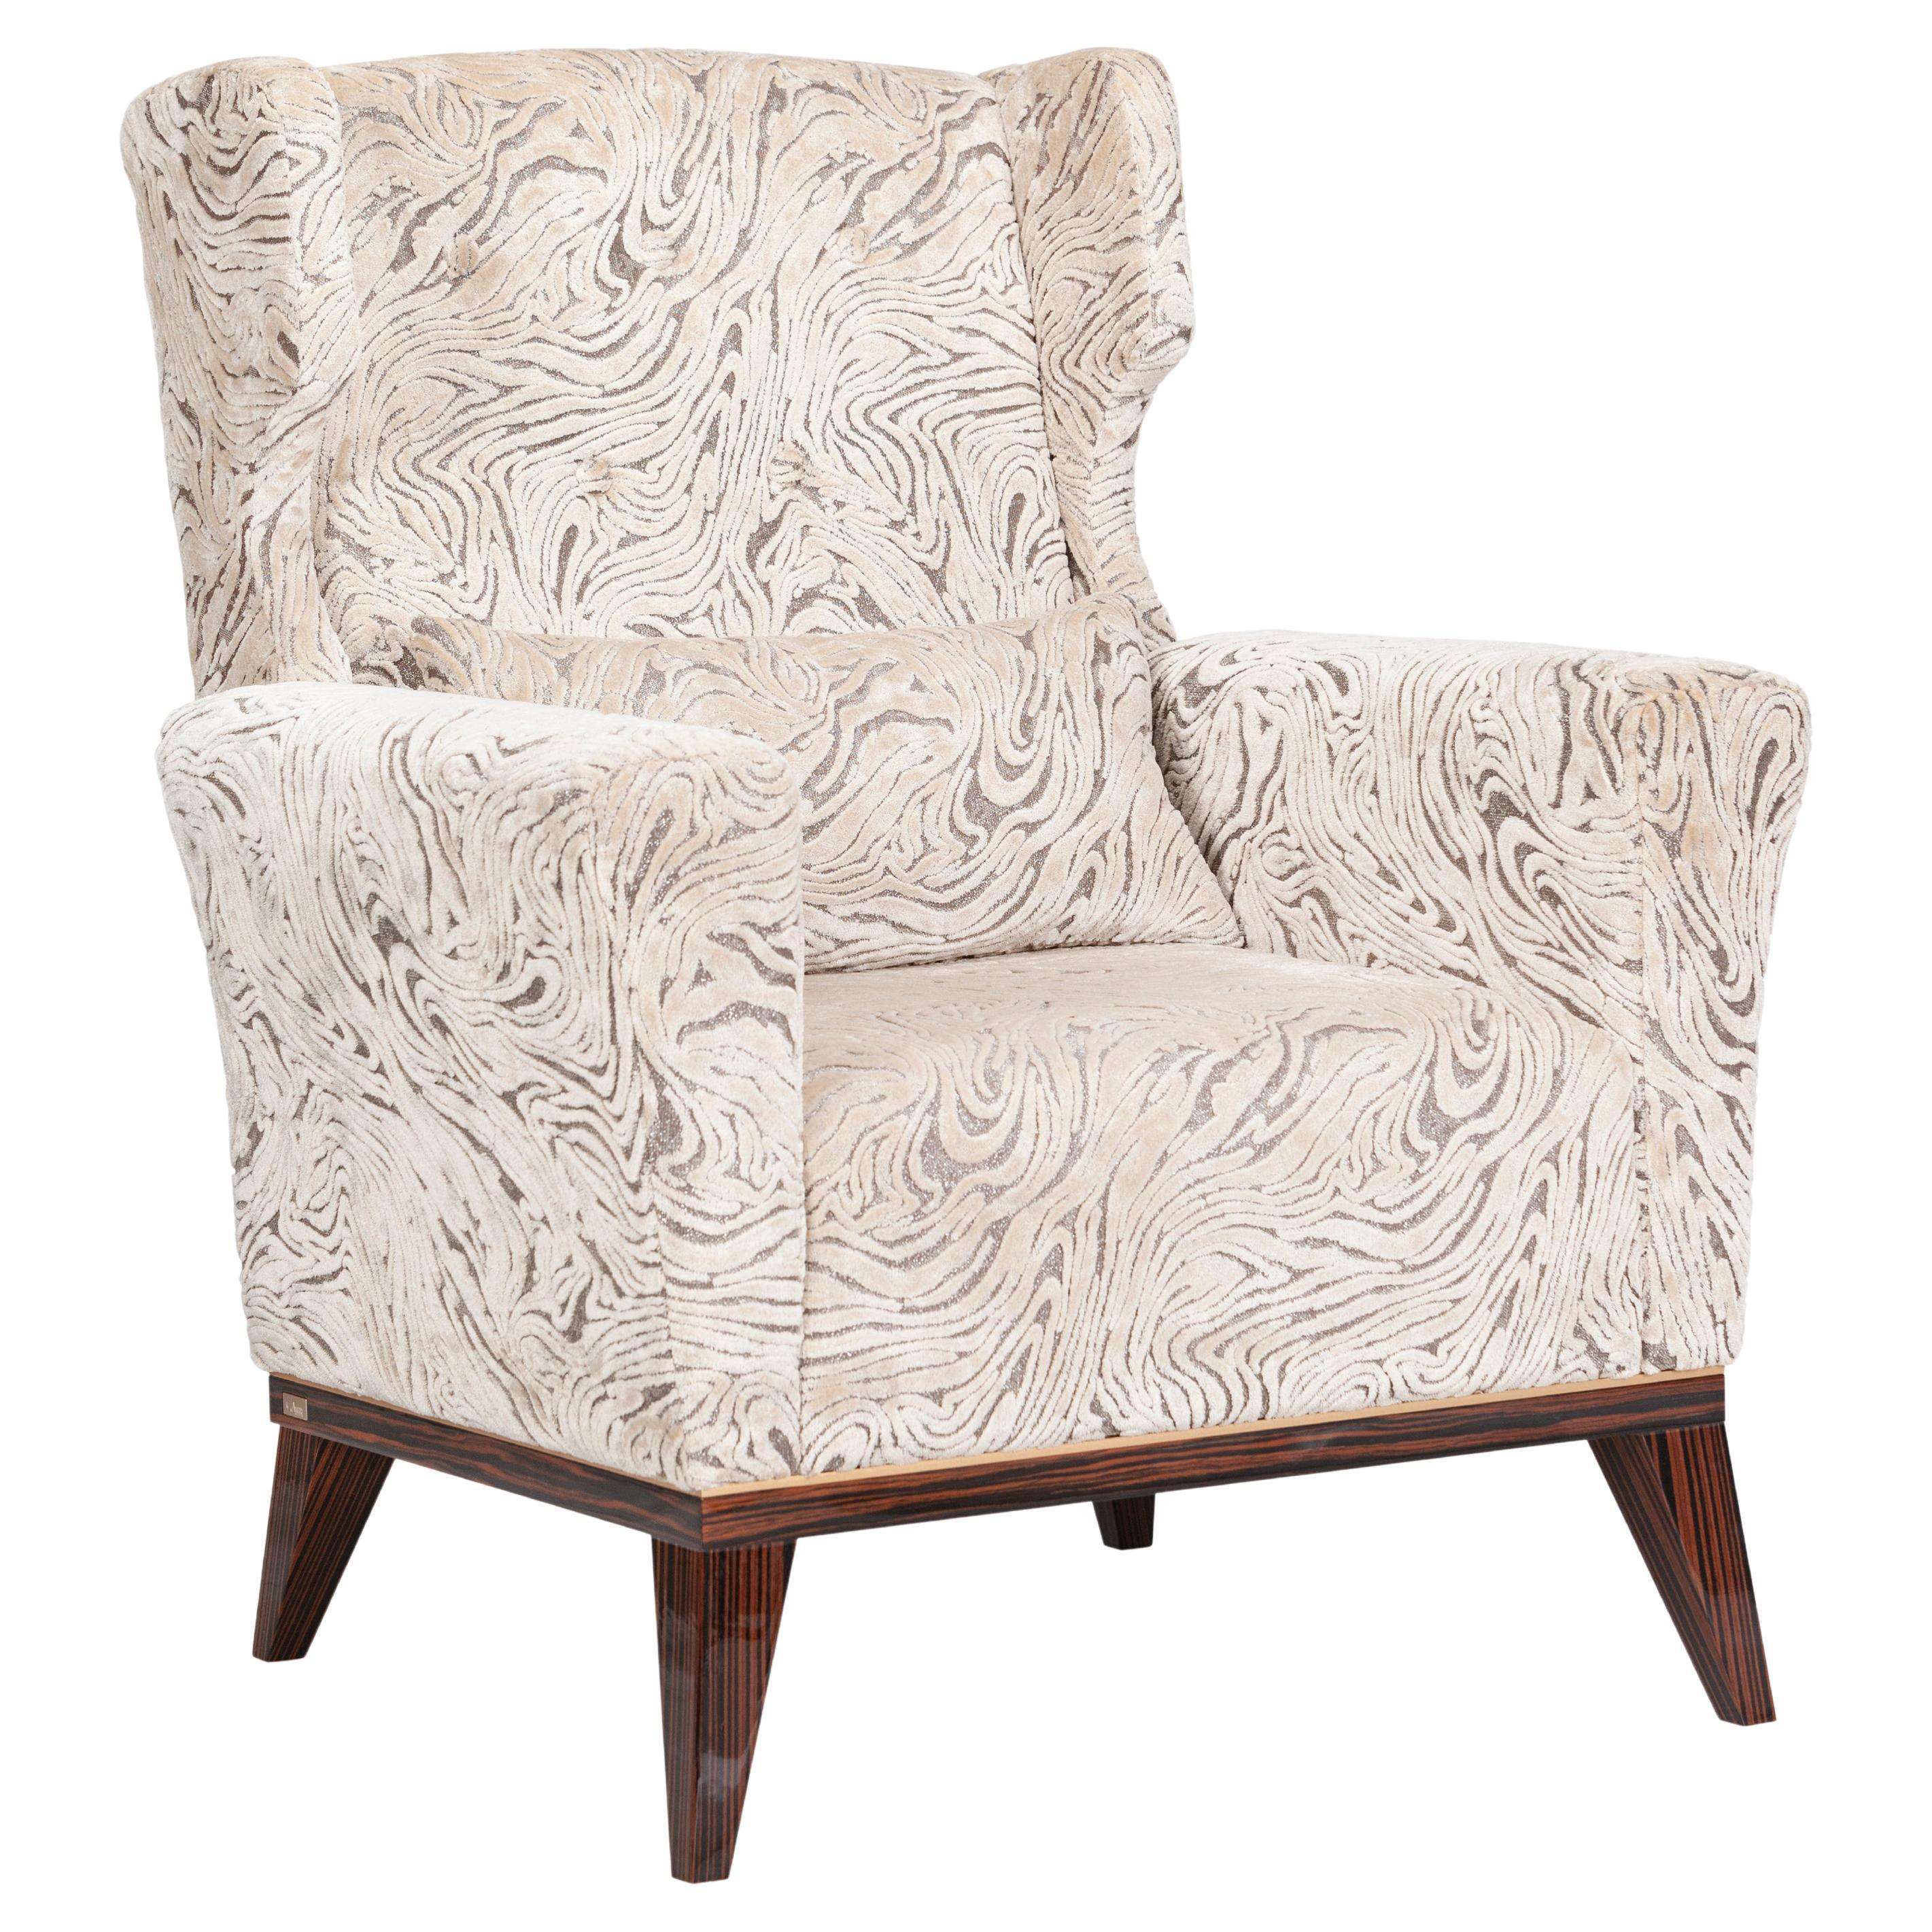 21st Century Neoclassical Genebra Armchair Handcrafted in Portugal by Greenapple